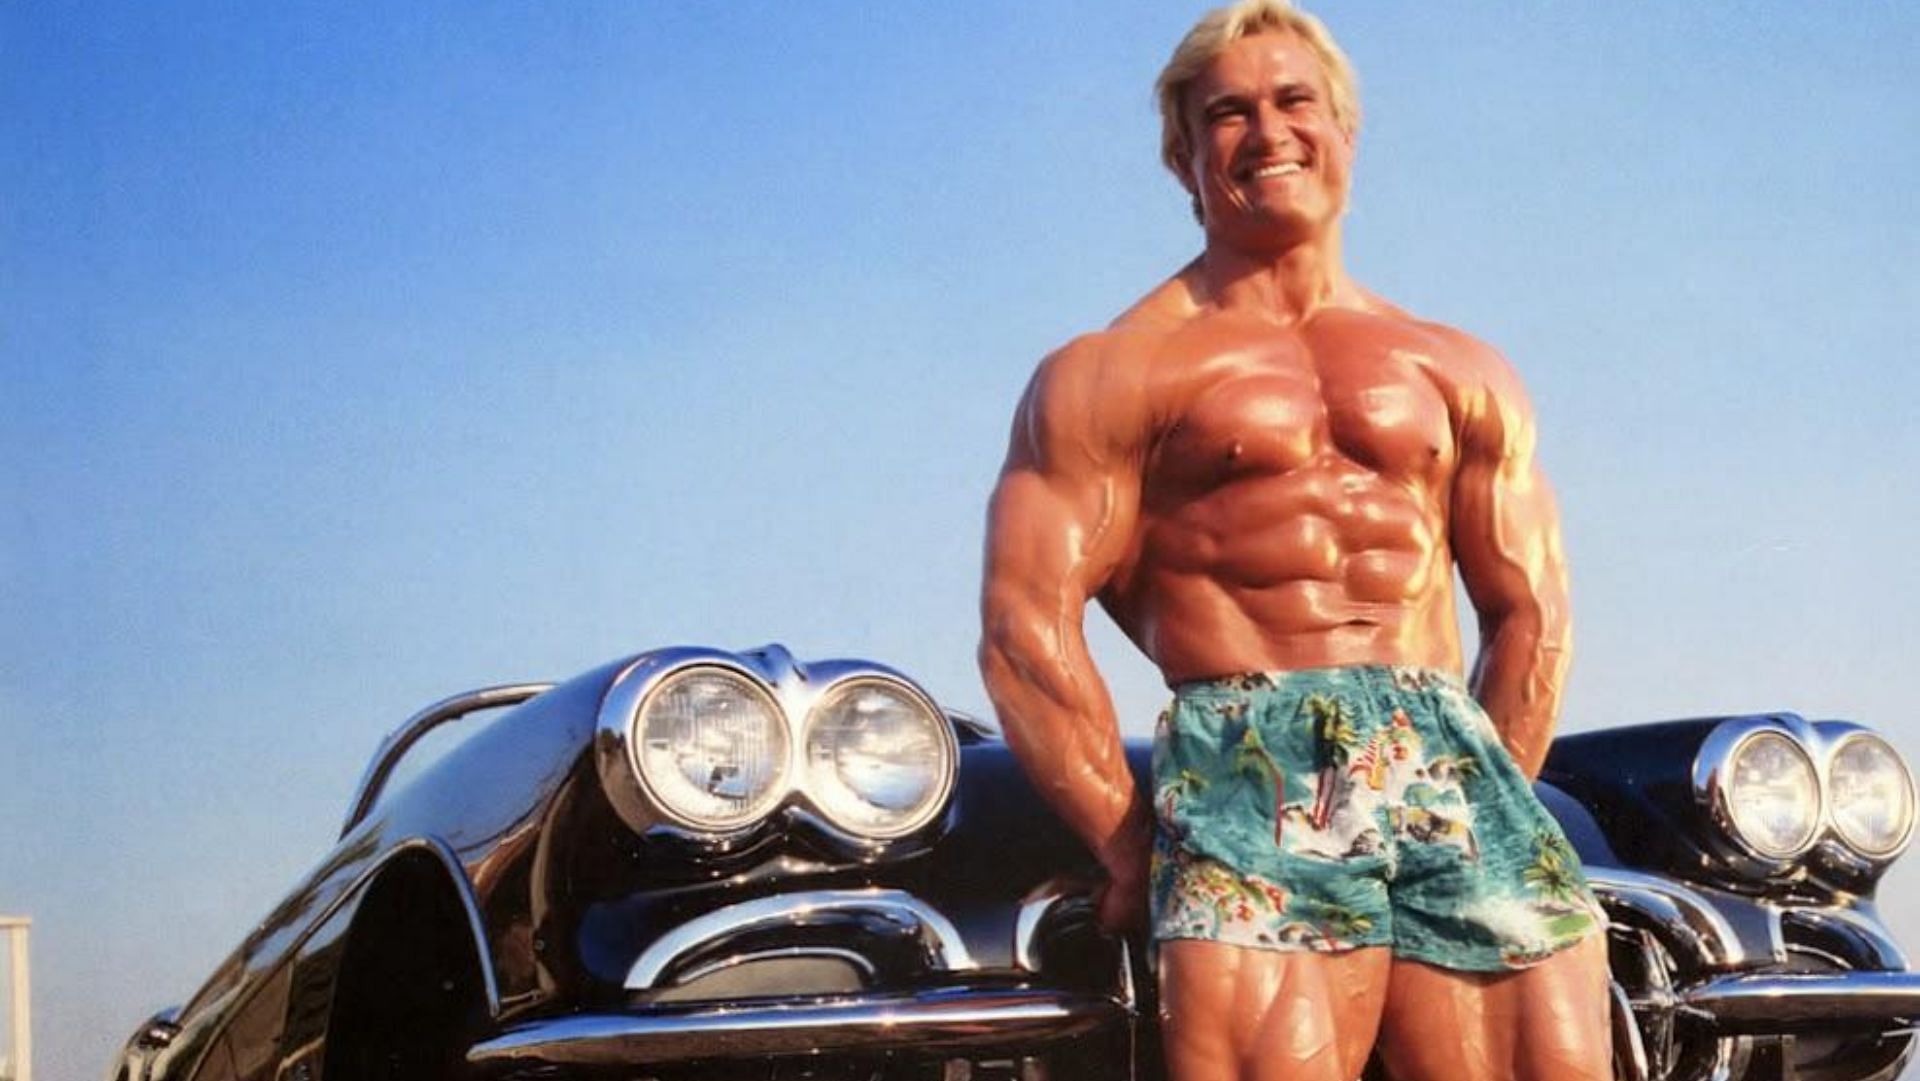 Tom Platz reveals his two compound steroid cycle.